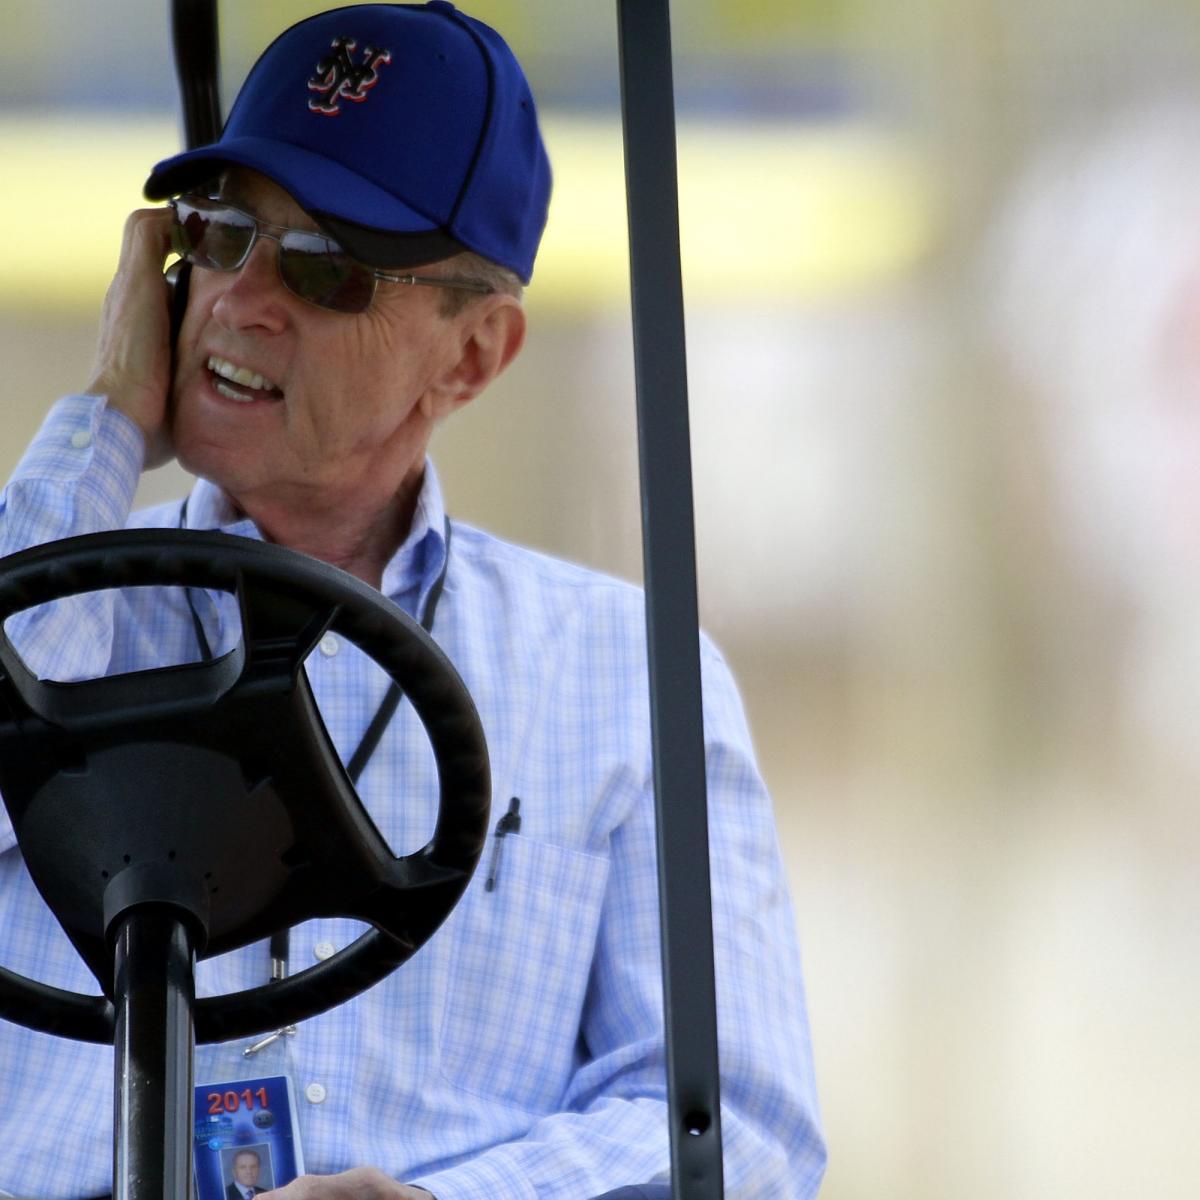 New York Mets Projected to Have Largest Payroll Drop Ever News